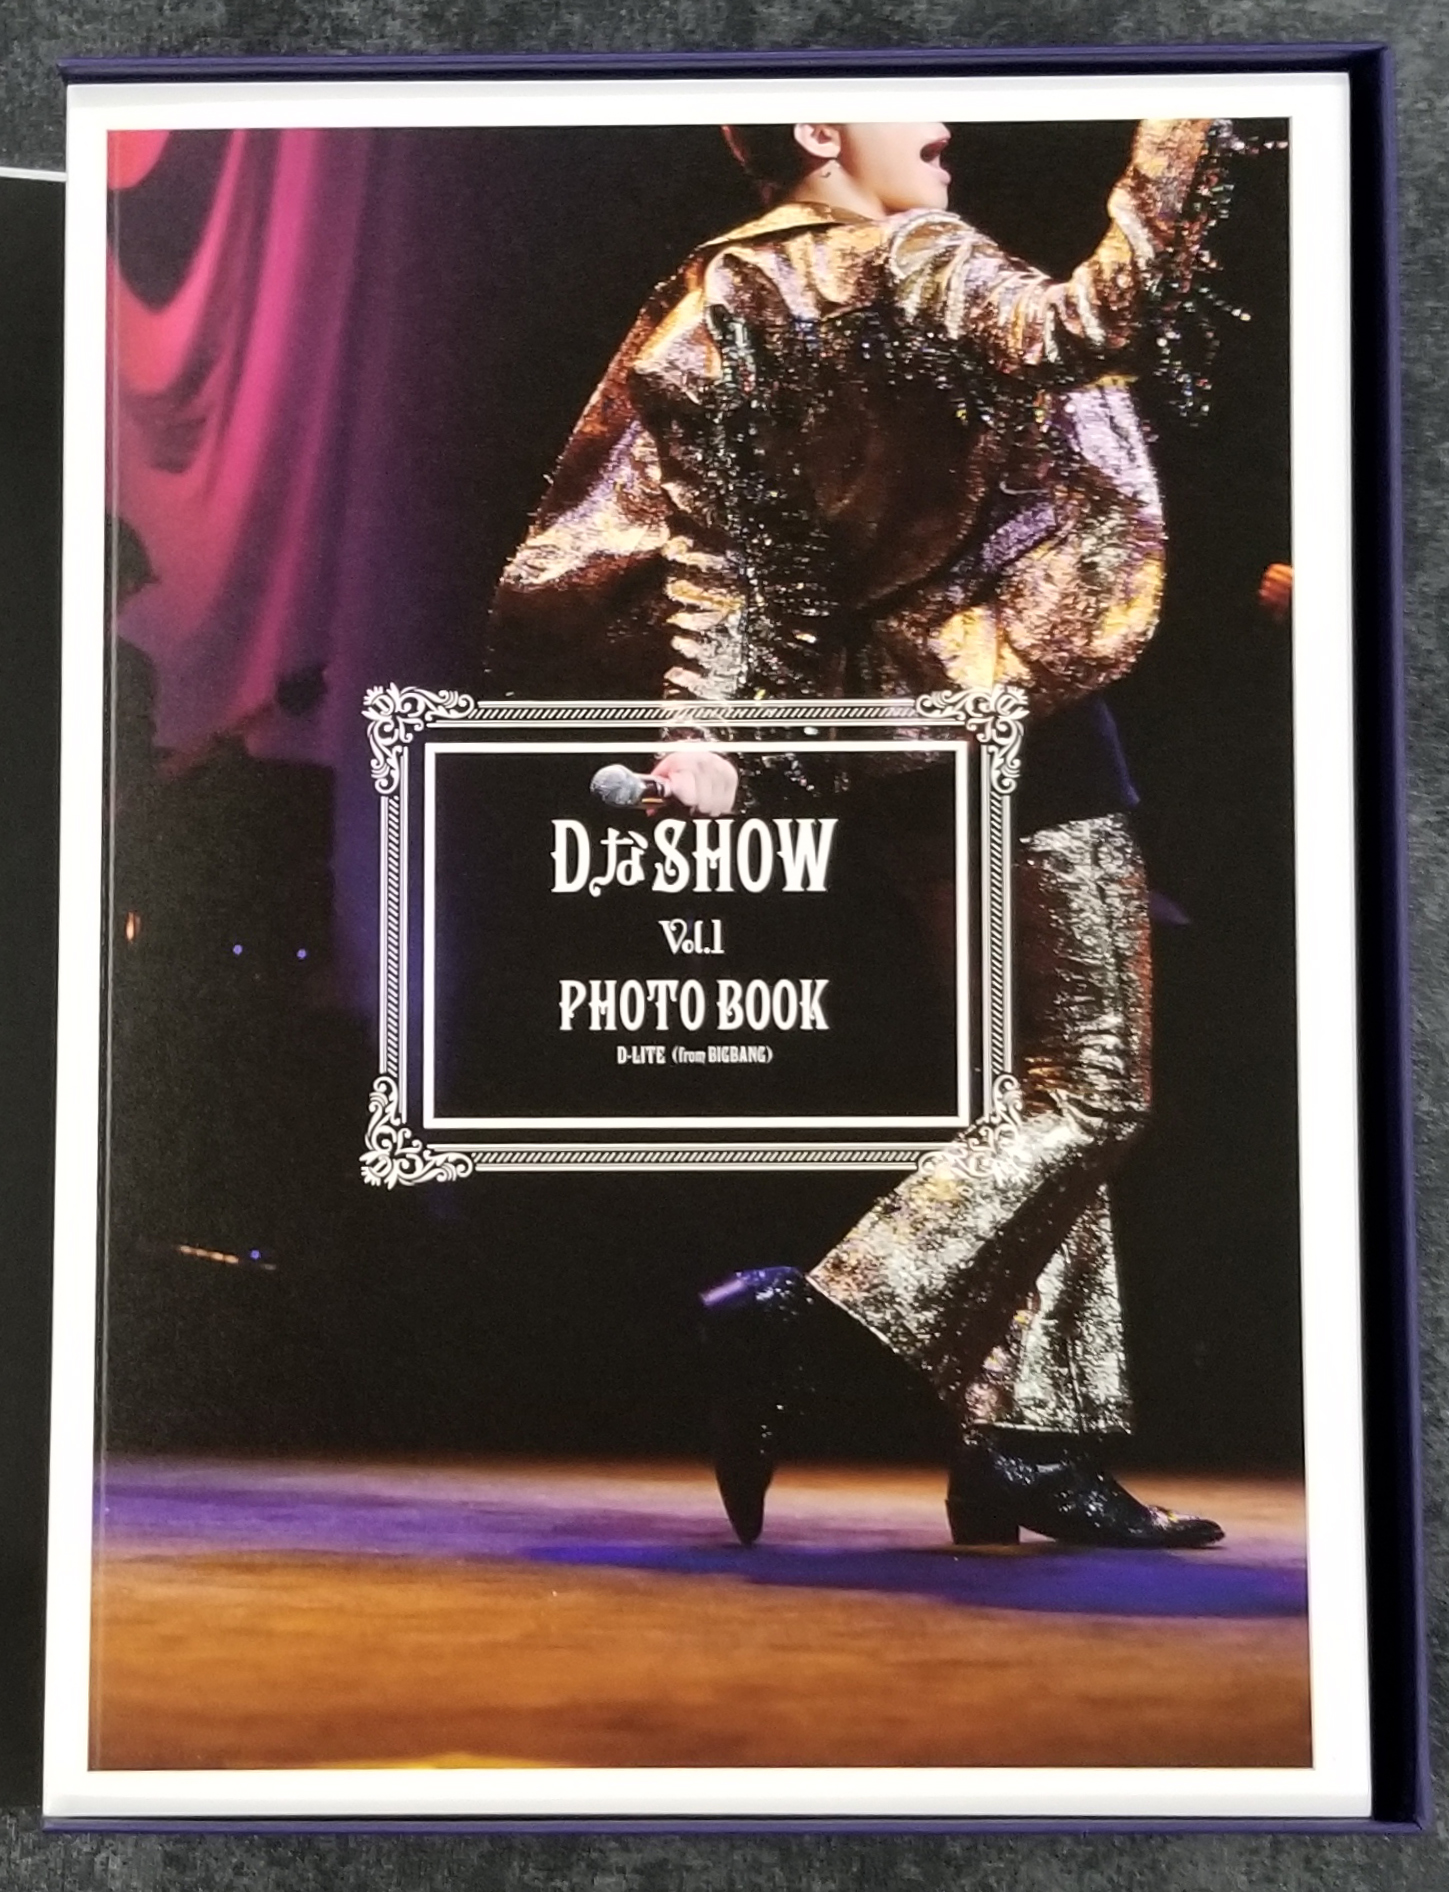 2018 - Dな Show Vol.1 - First Press Limited Edition (3DVD+2CD